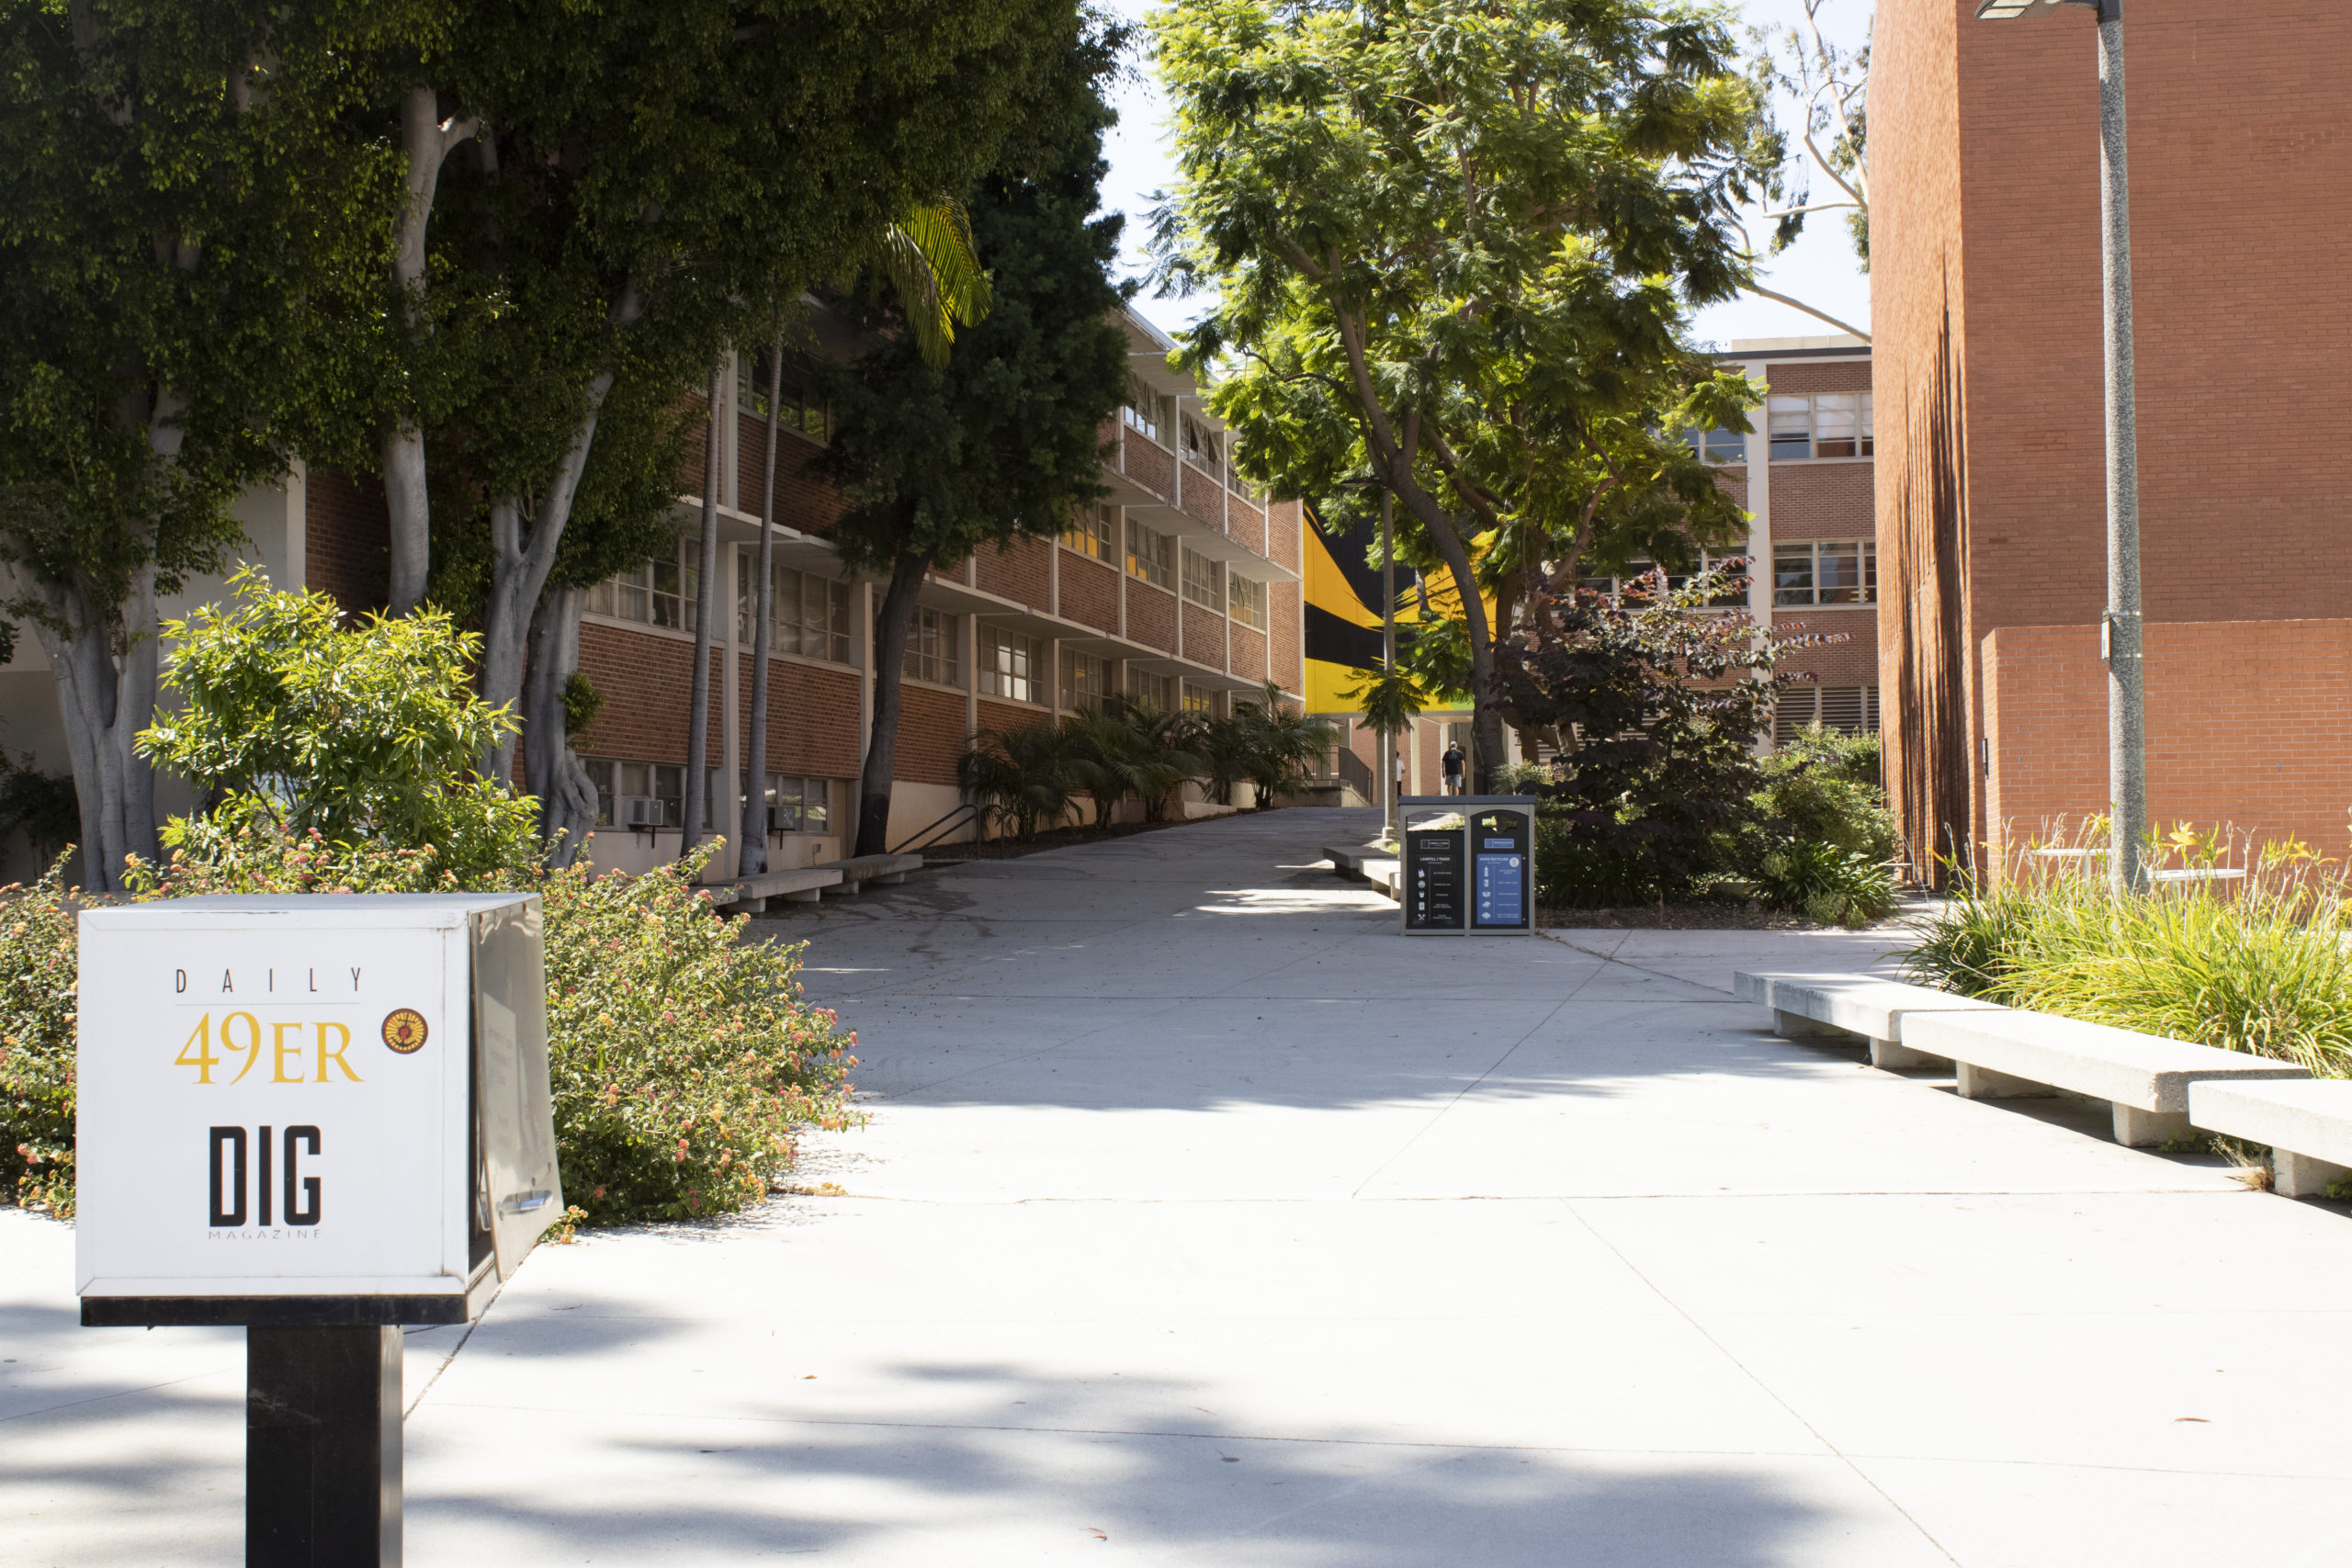 BREAKING: CSULB to see 47% of courses in-person for fall 2021, anticipates 100% in spring 2022